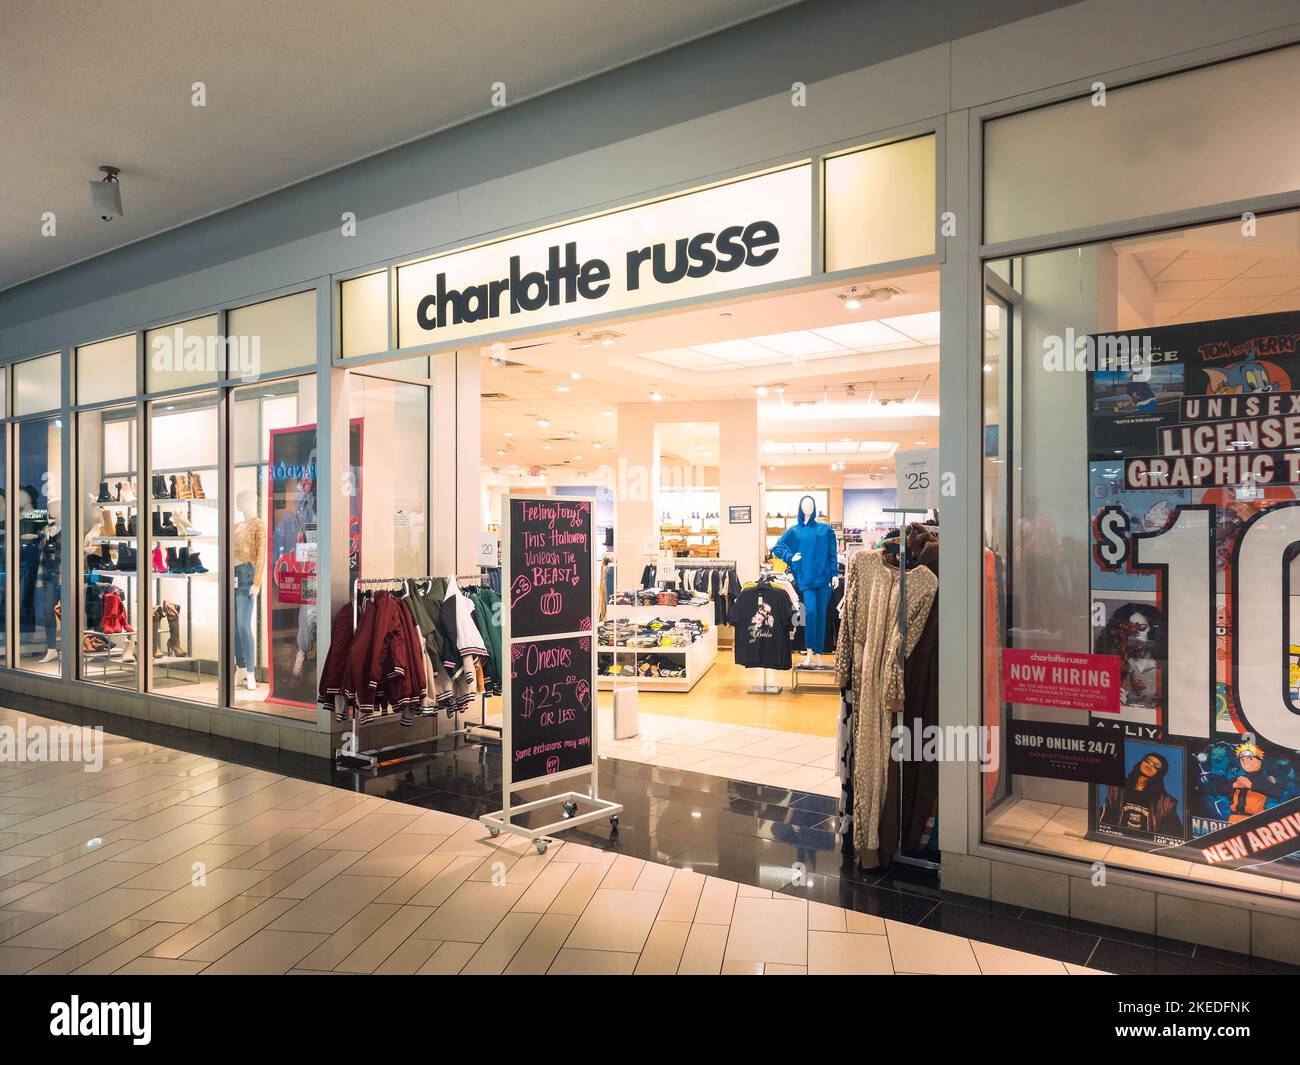 New Hartford, New York - Oct 24, 2022: Landscape Closeup View of Charlotte Russe Storefront inside Sangertown Mall. Charlotte Russe is an American Clo Stock Photo